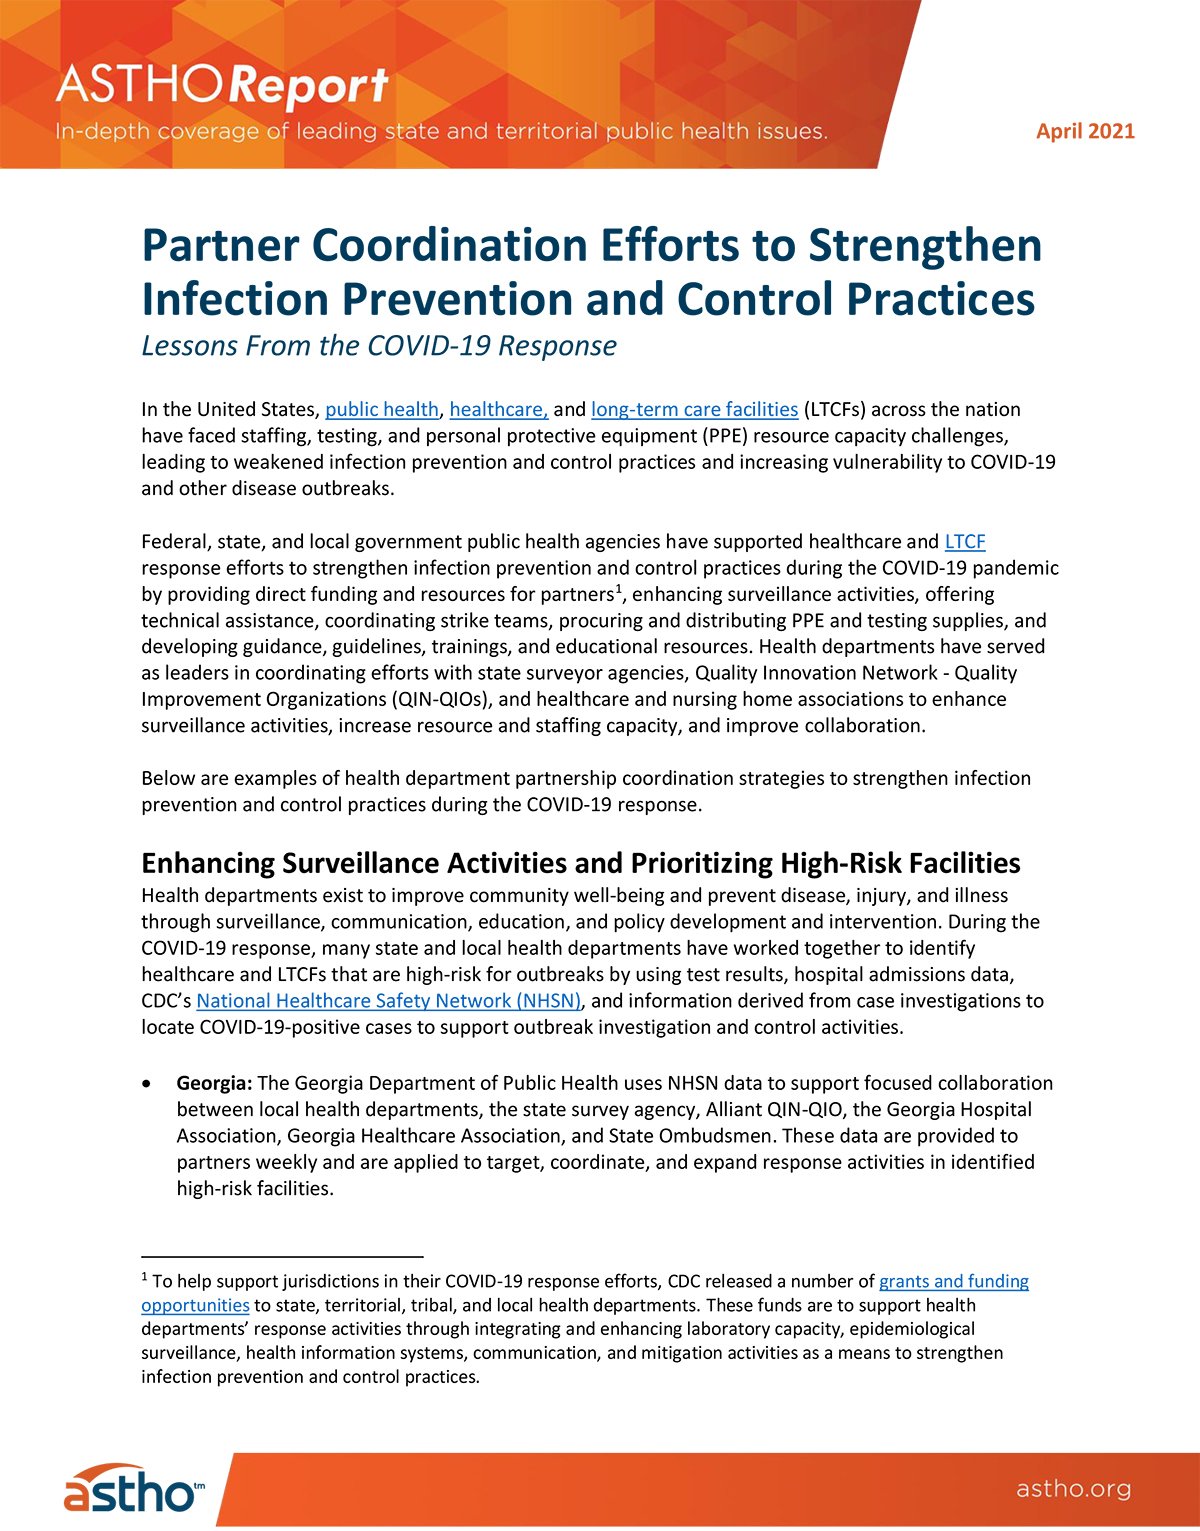 ASTHOReport: Partner Coordination Efforts to Strengthen Infection Prevention and Control Practices